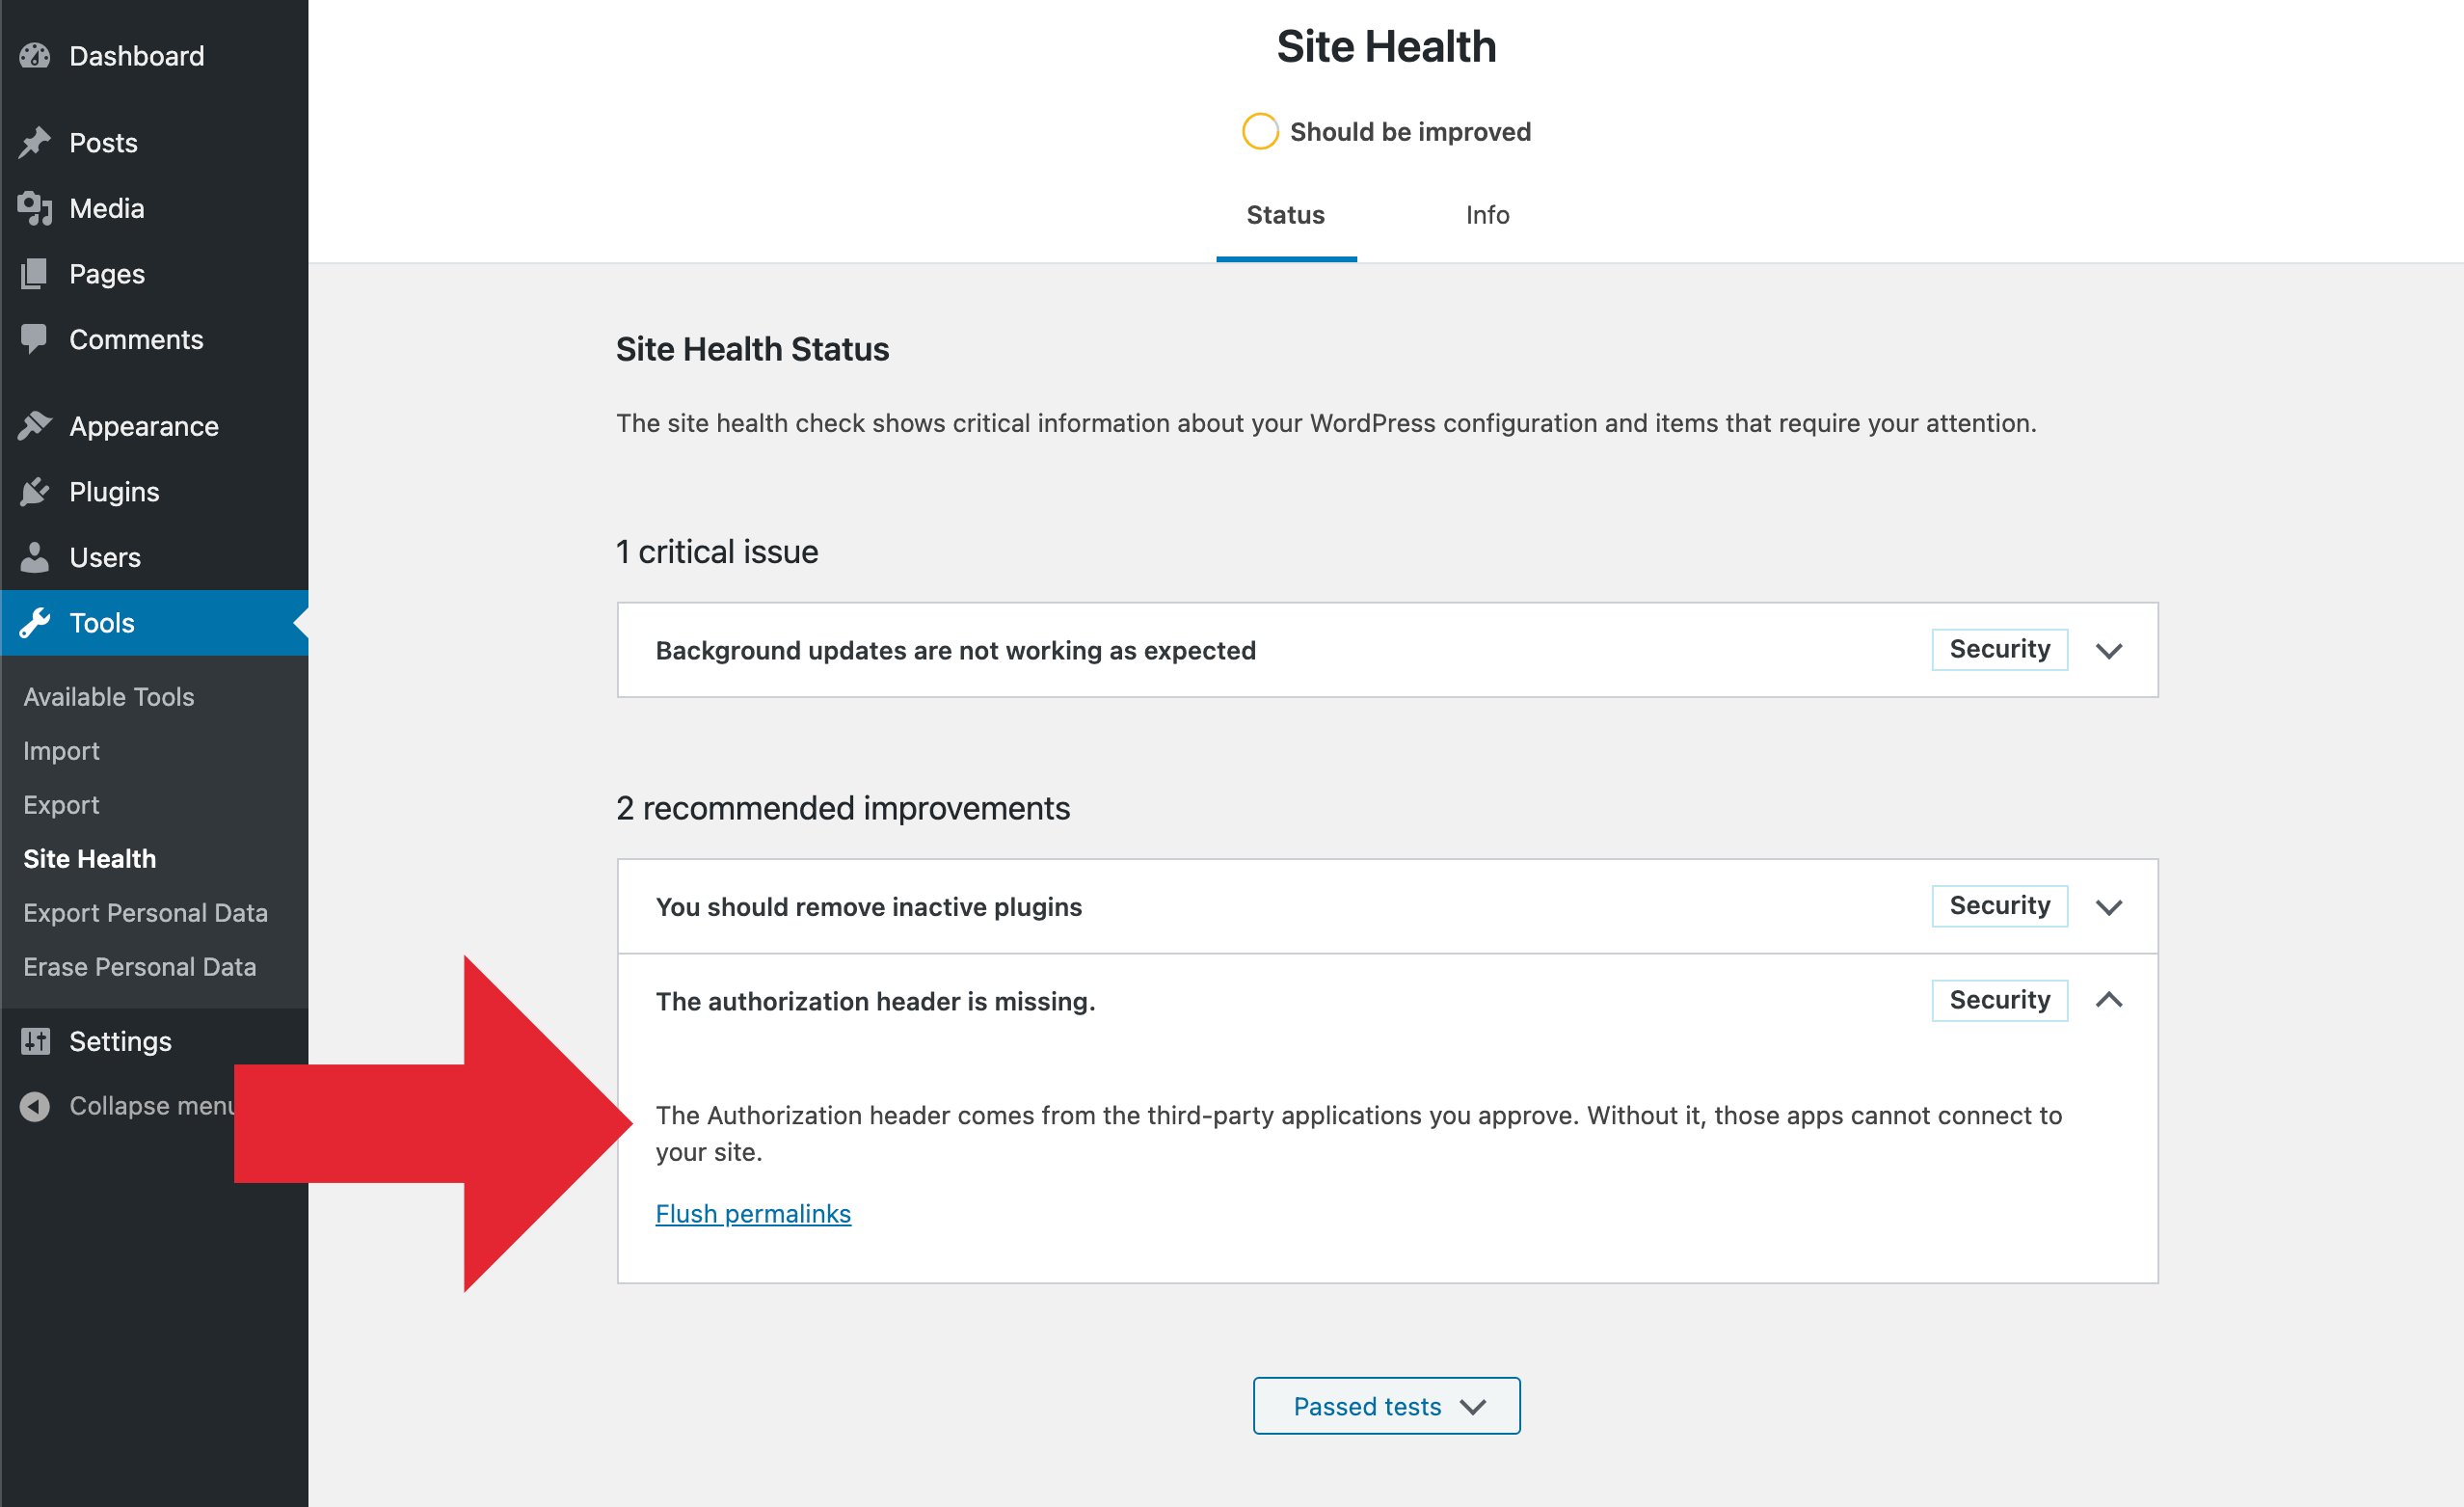 Site Health Results: Authorization Header Missing (Details)